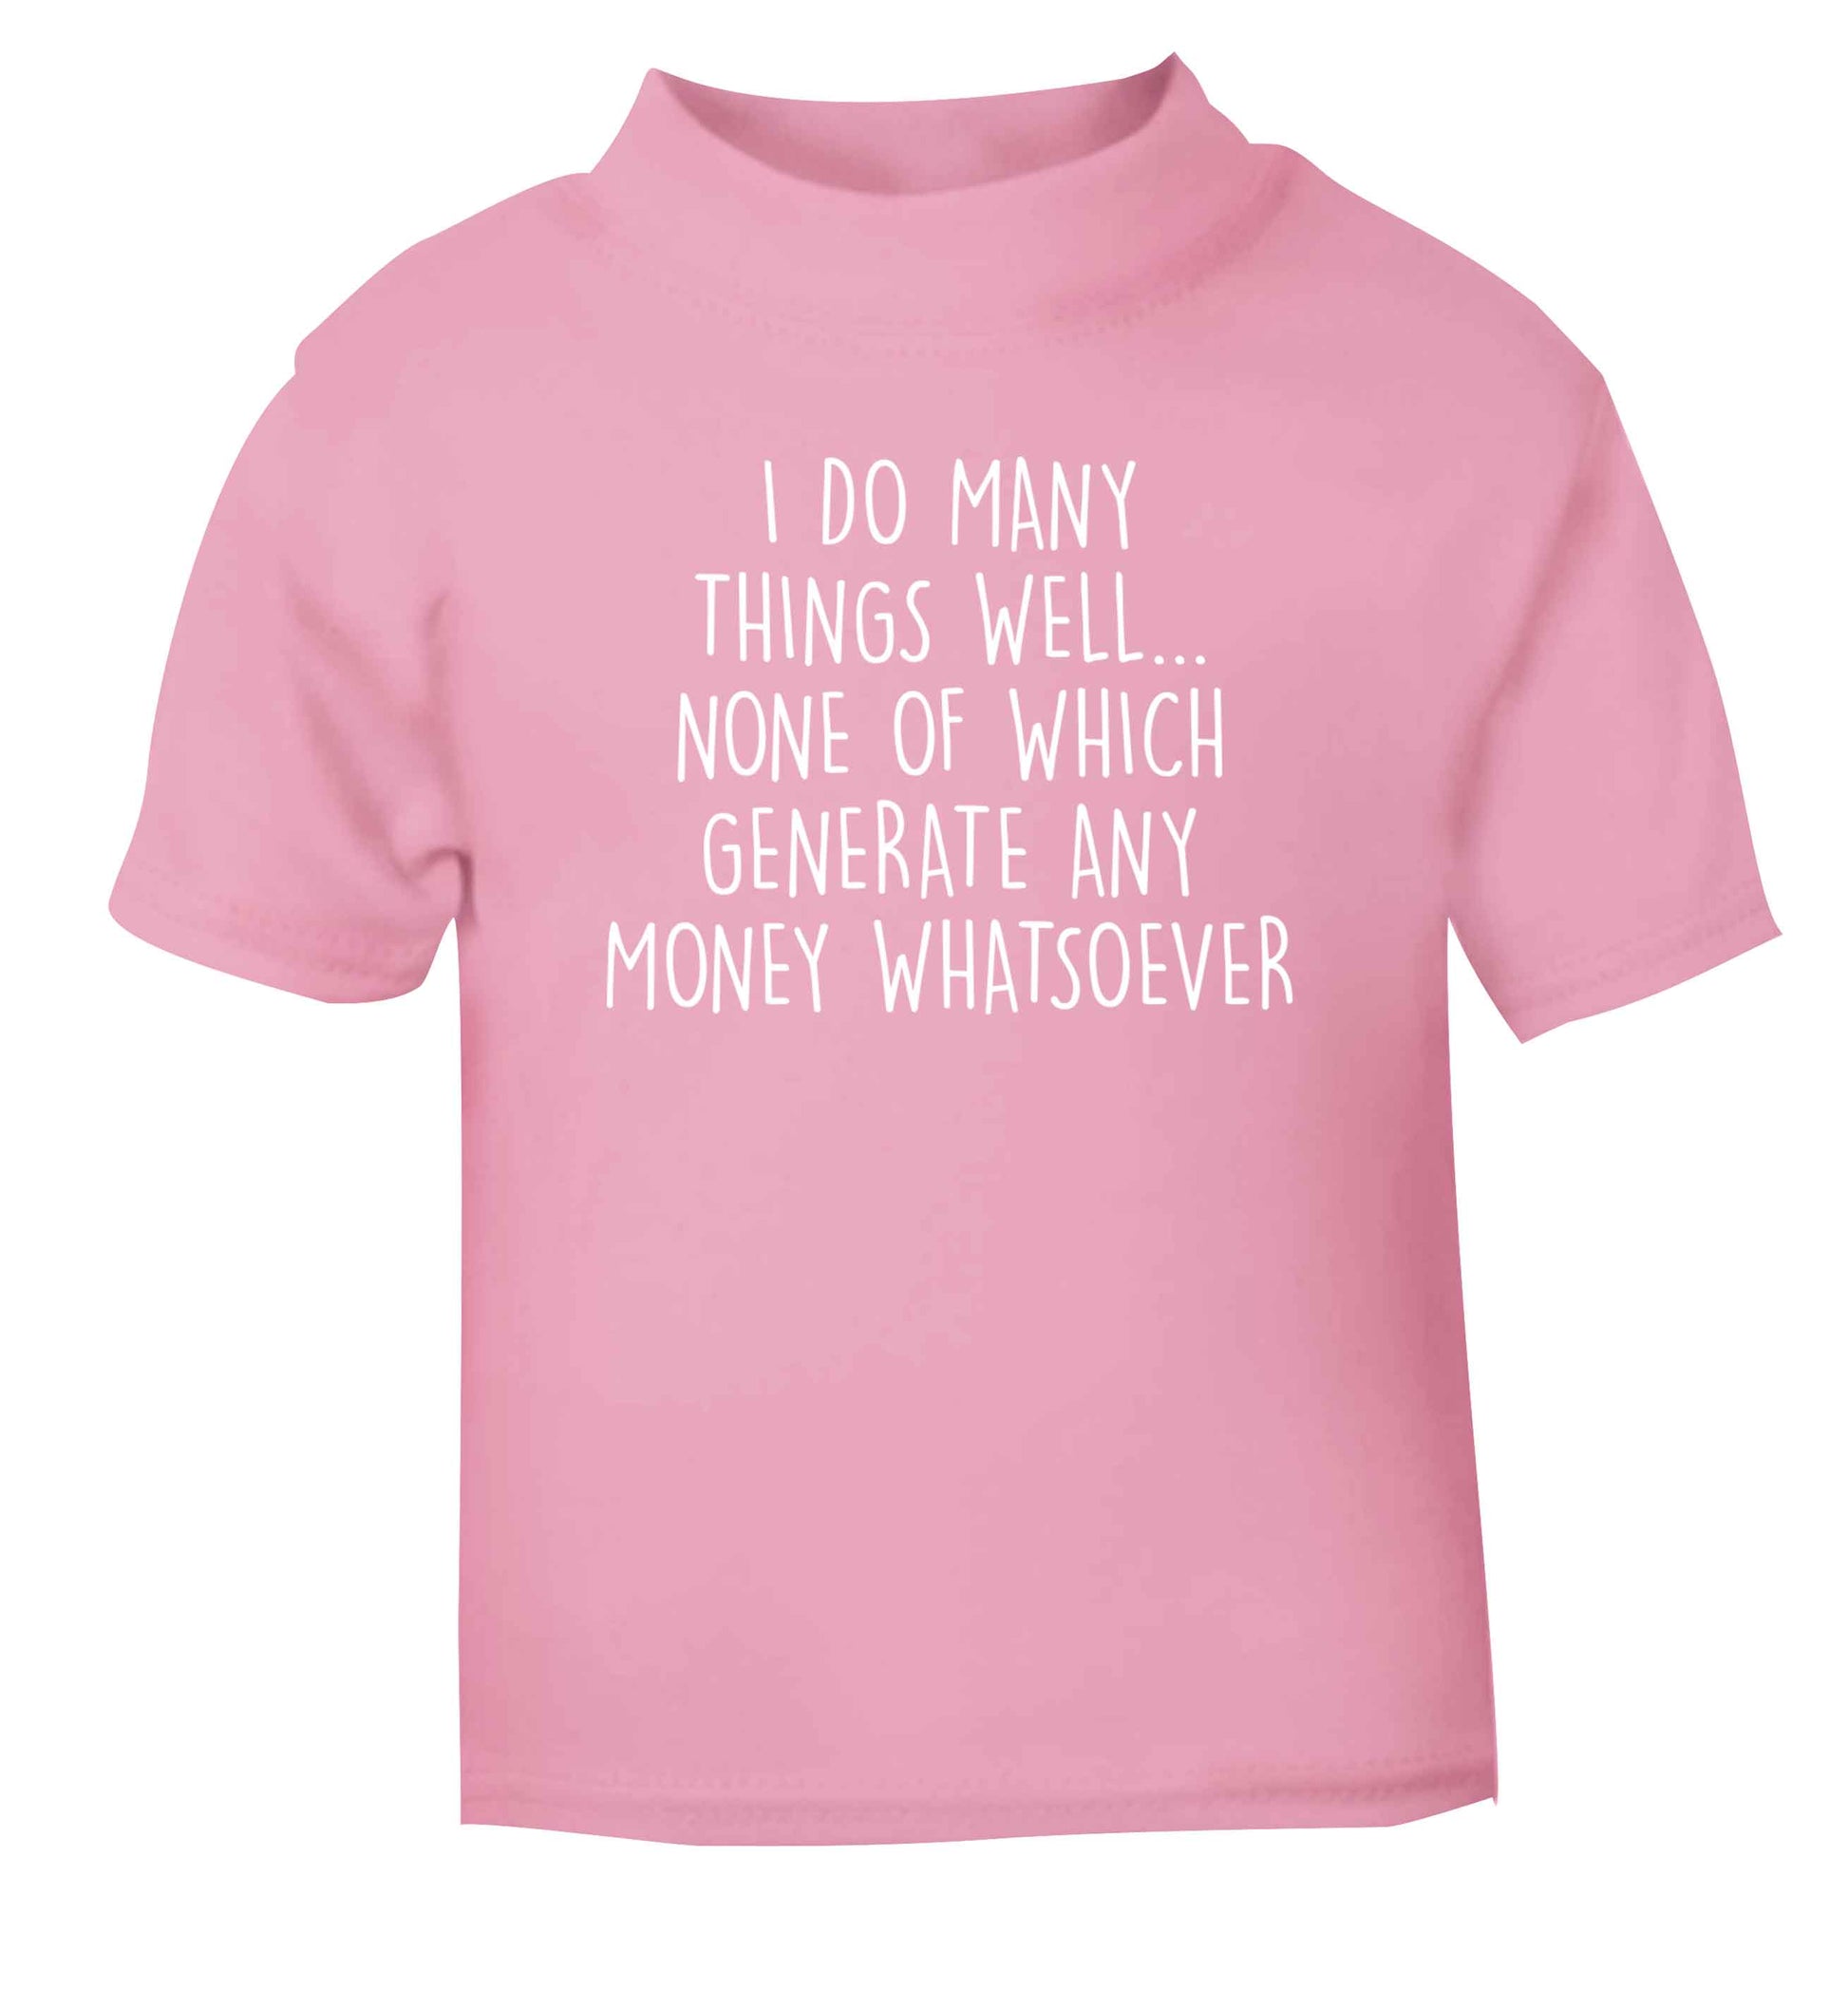 I do many things well none of which generate income light pink Baby Toddler Tshirt 2 Years